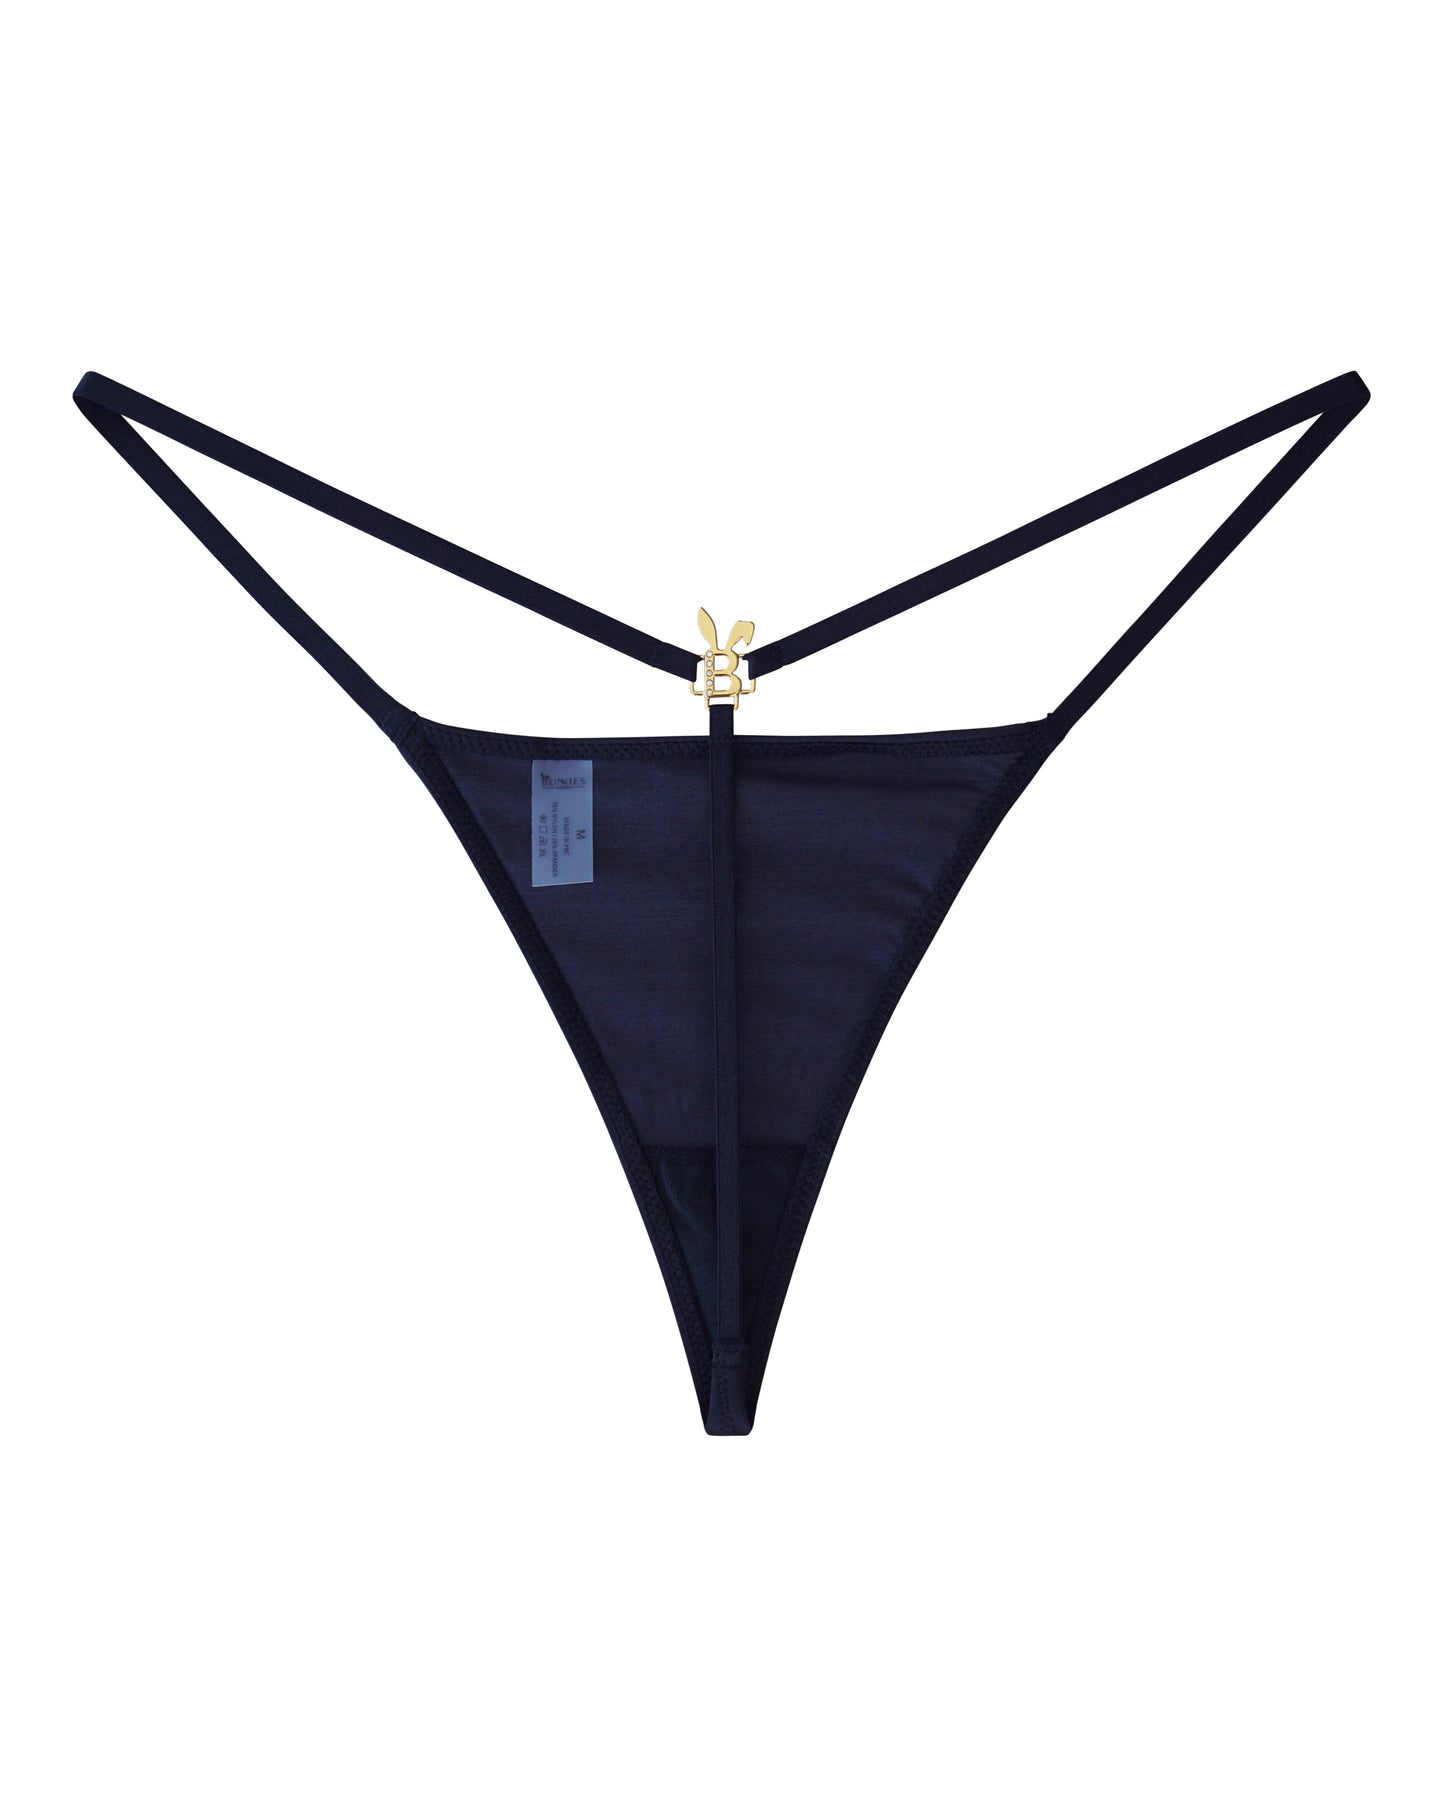 BUNNY G-STRING THONG IN BLACK – BUNNIES' ROOM